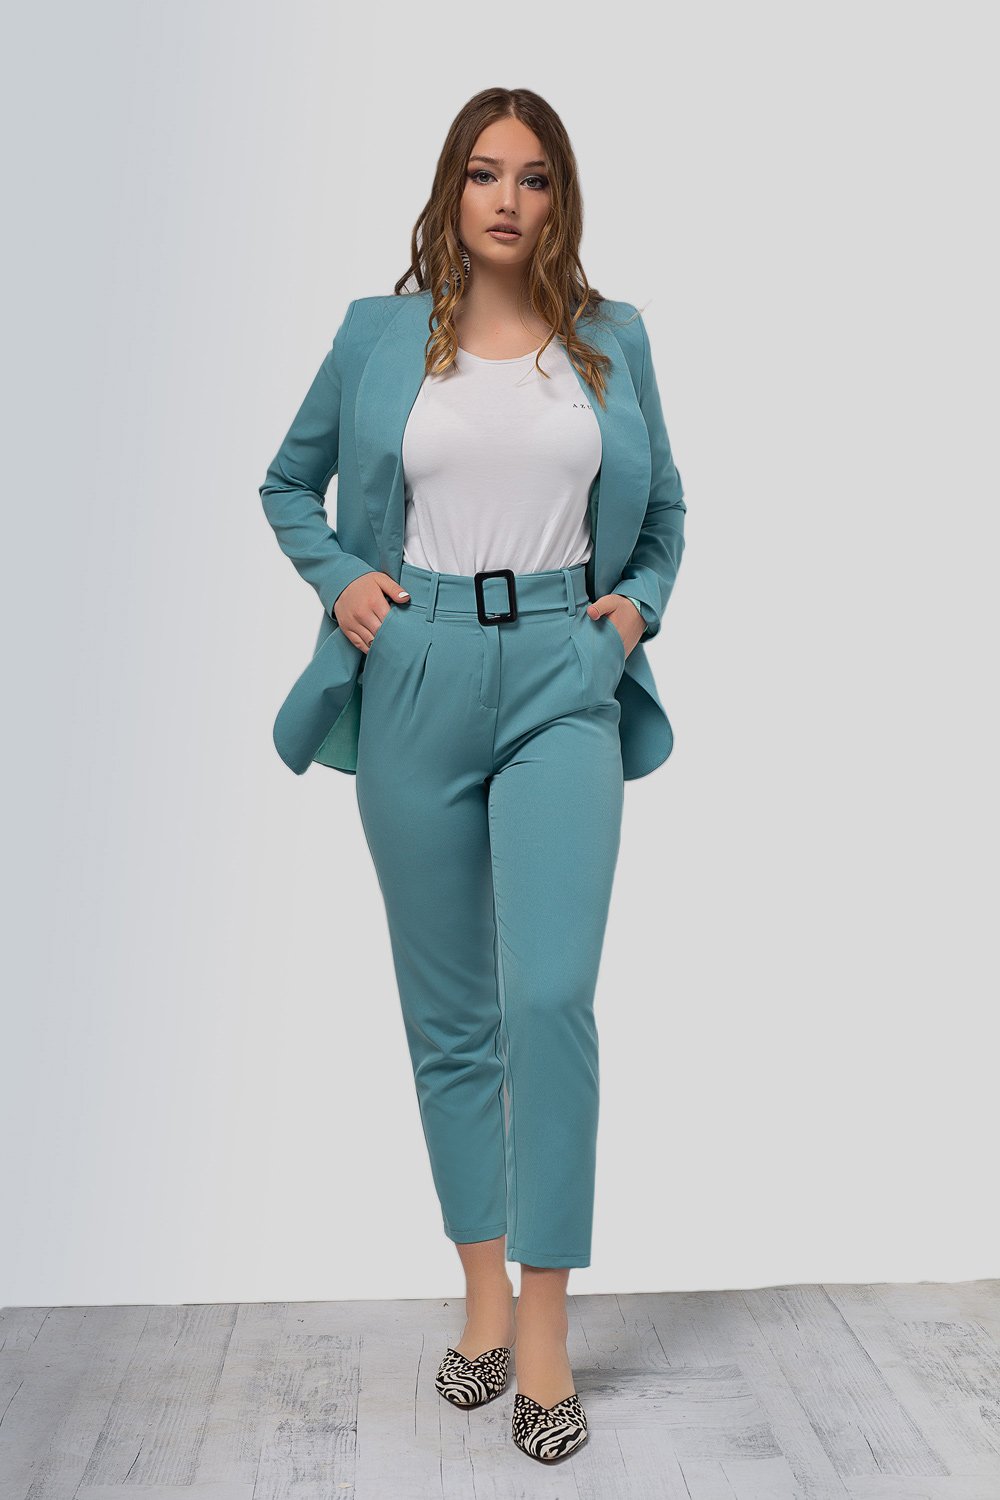 Turquoise blazer with a collar apache